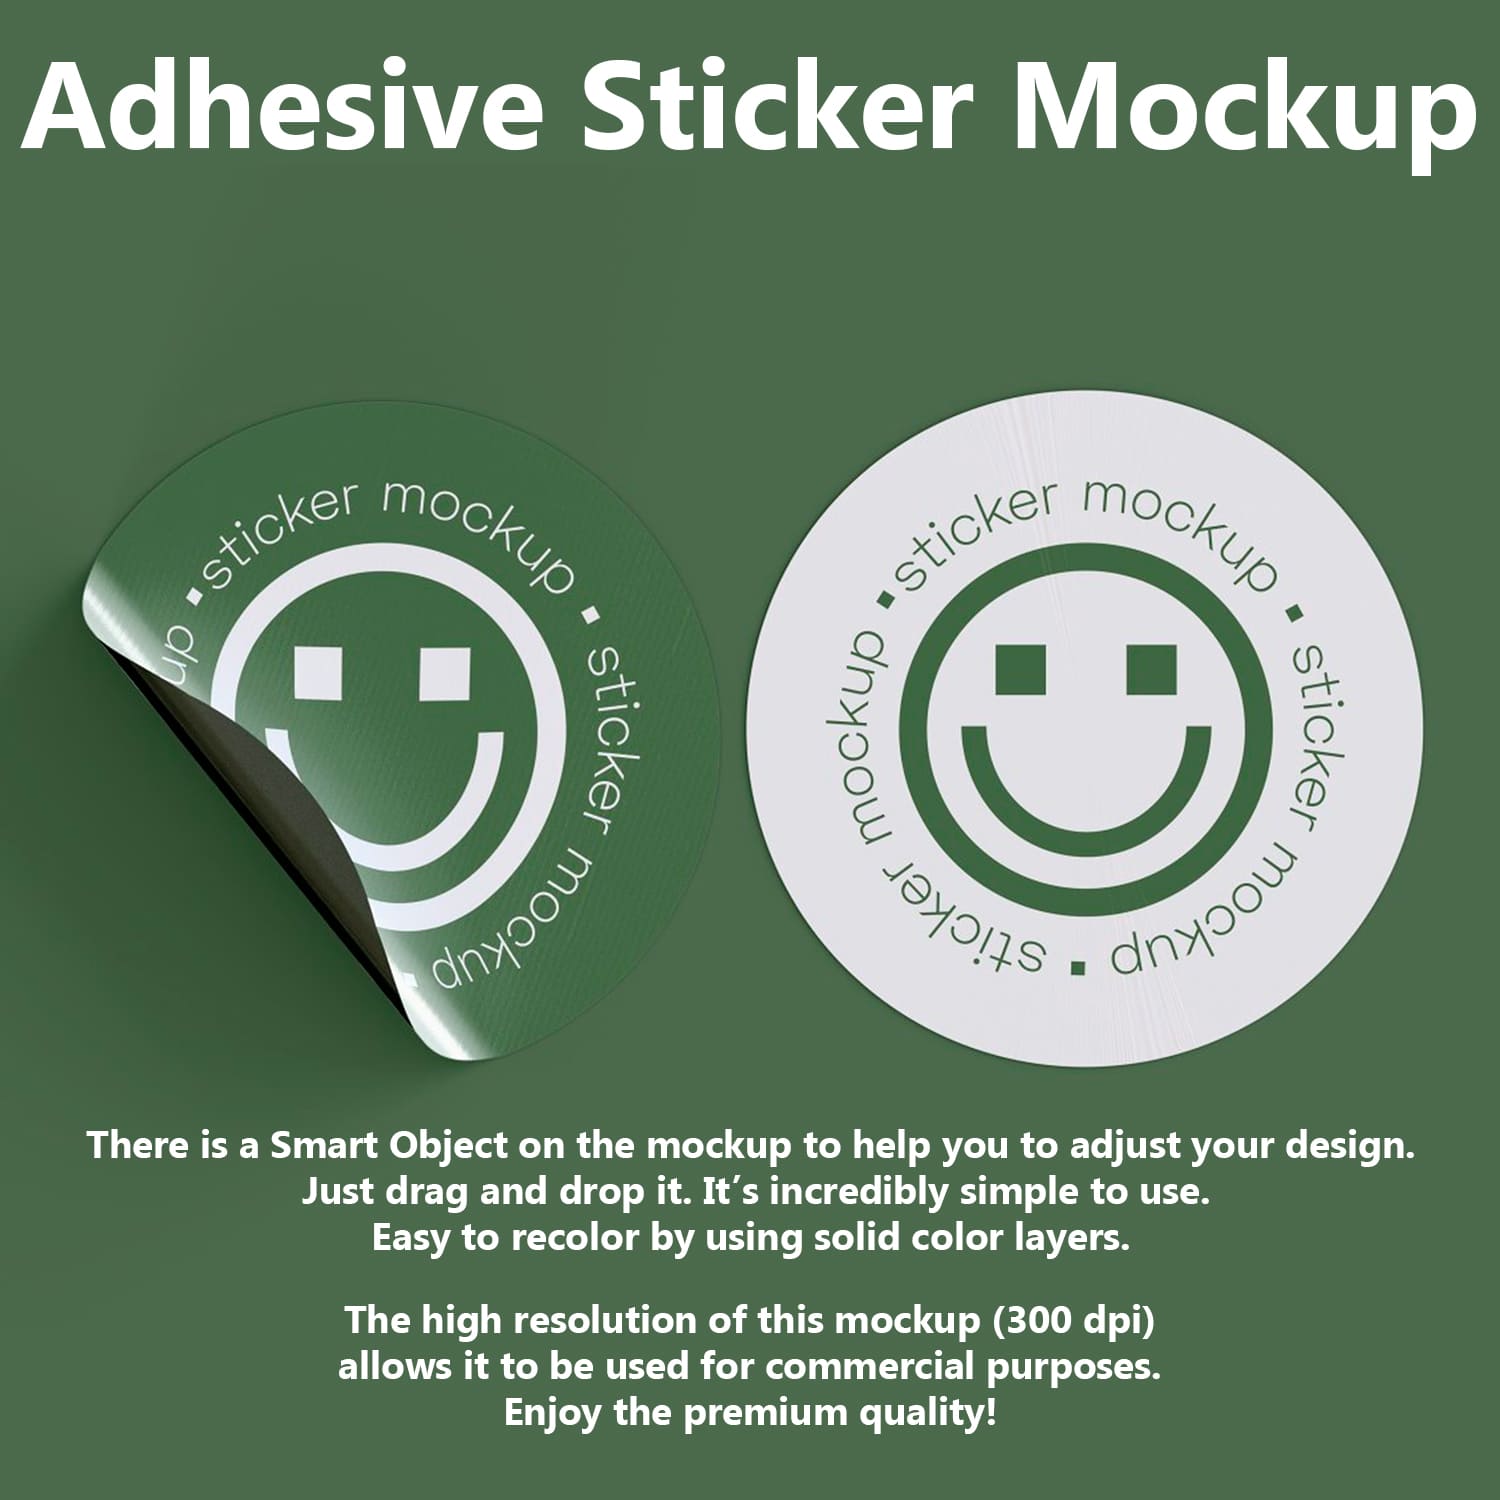 Images of a colorful adhesive sticker with images of an emoticon.